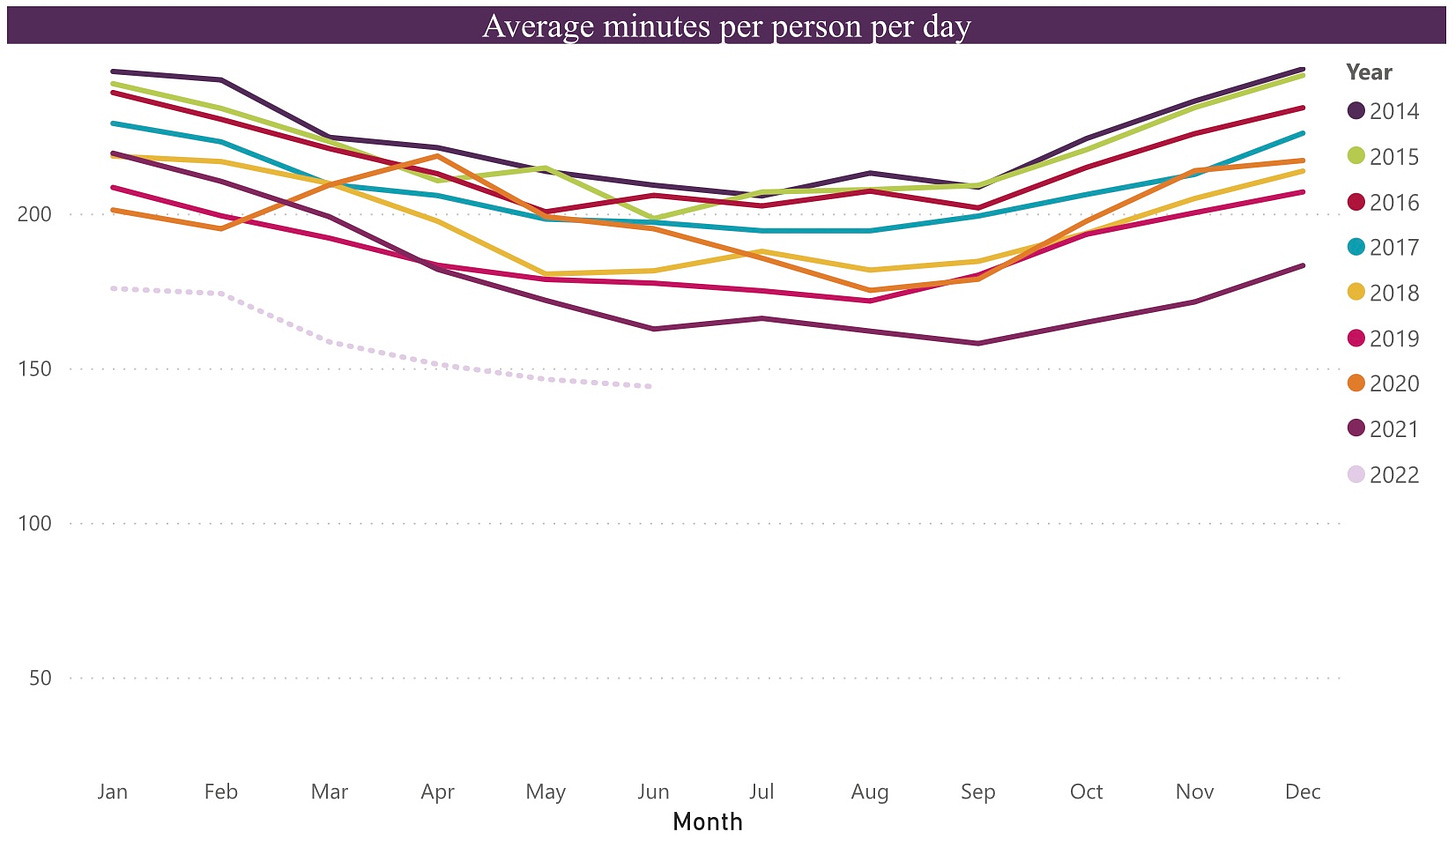 Chart showing average minutes of TV viewing per person per day in the UK from 2014 to 2022